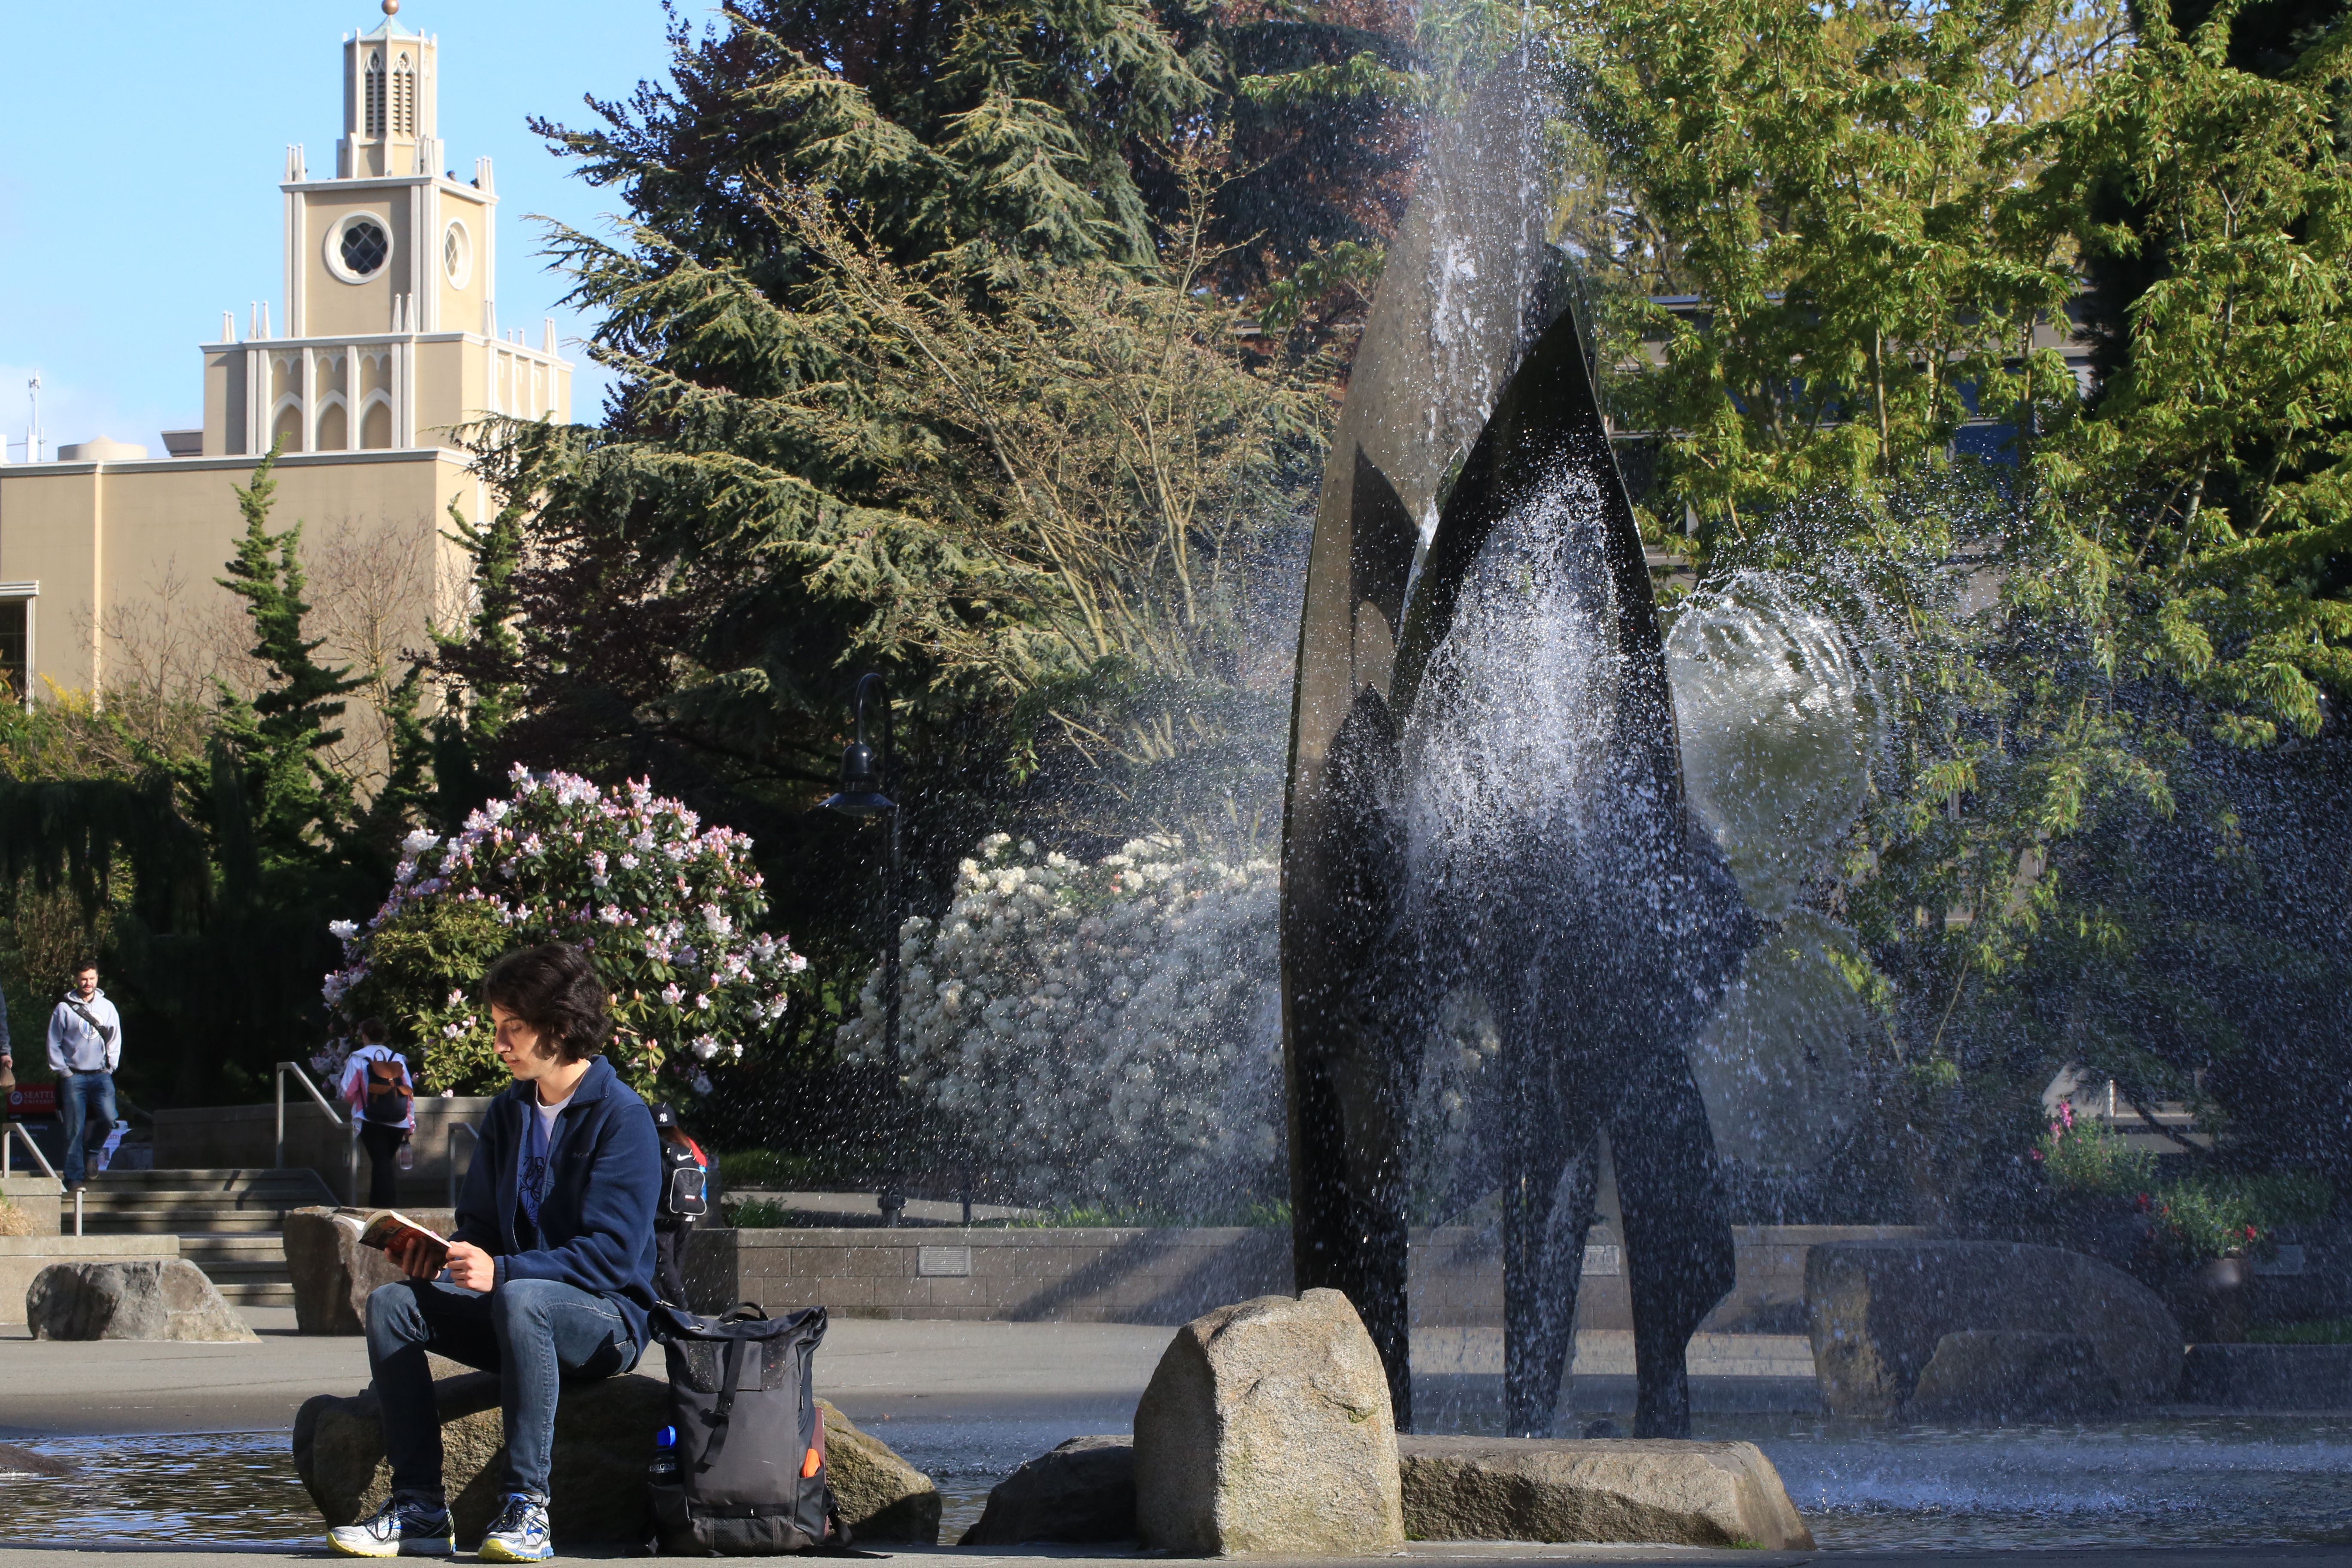 Student reading a book in front of fountain in SU quad